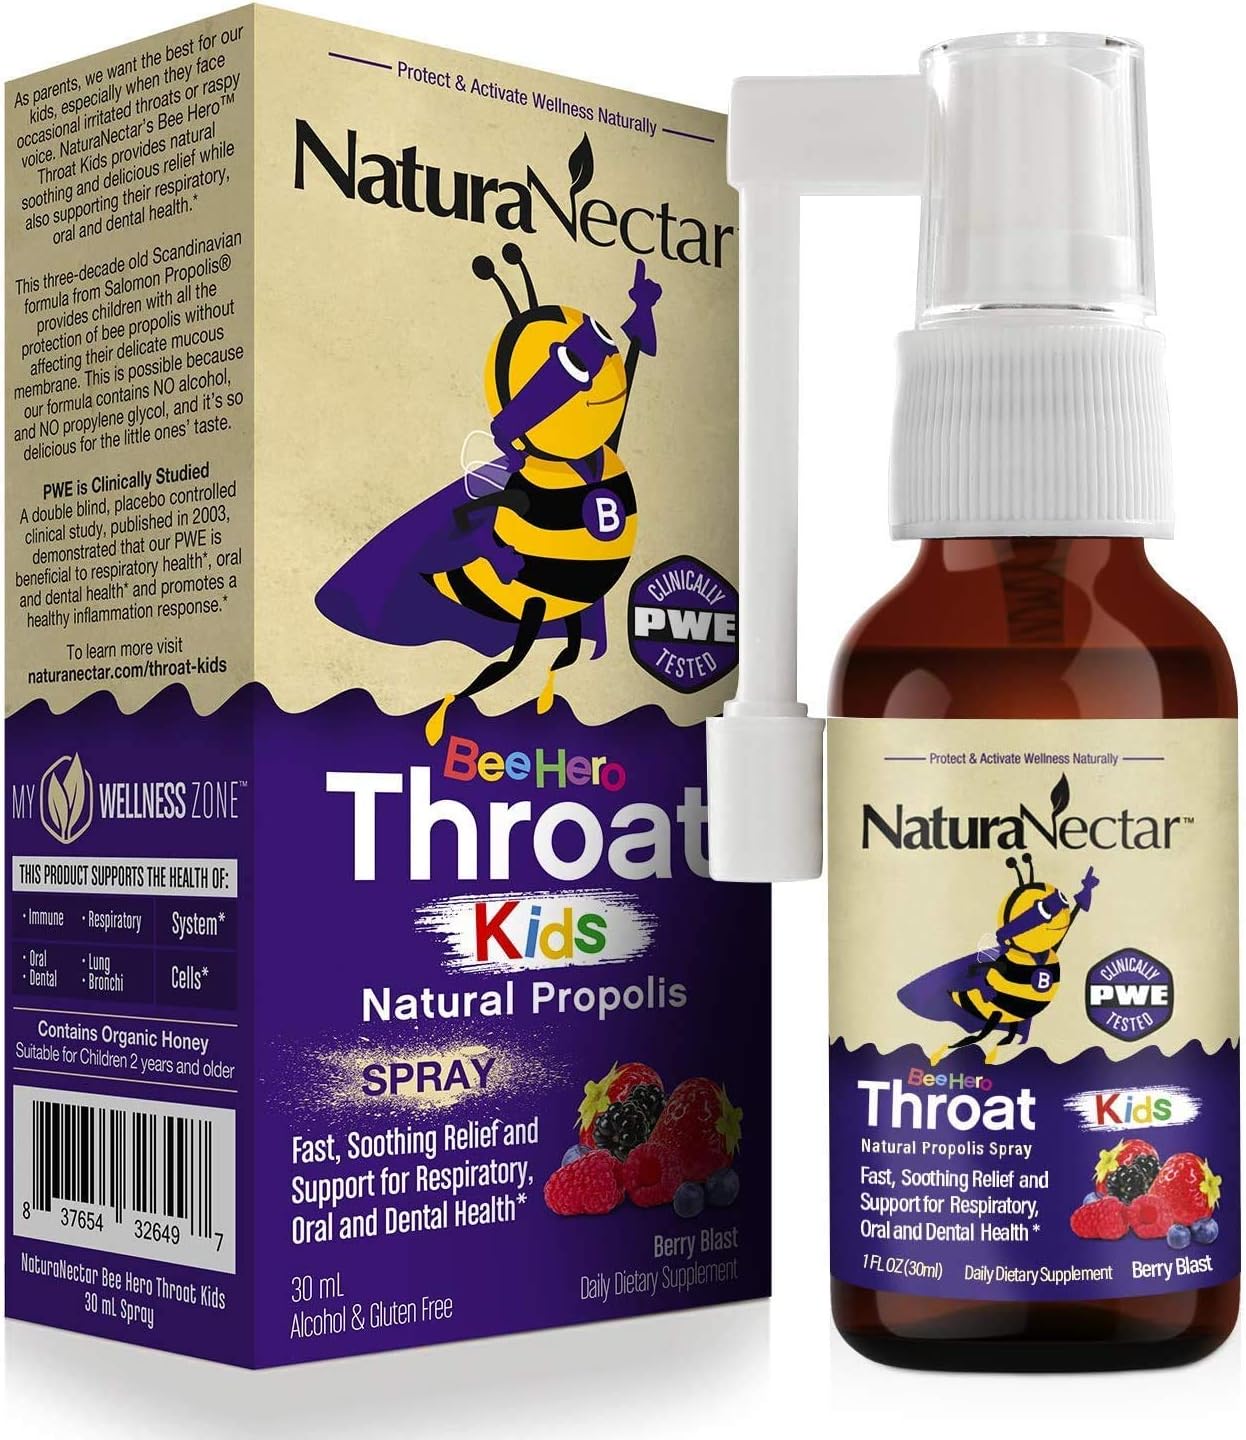 BeeHero Throat Kids Propolis Spray – Supports your kids throat health*, immune* and respiratory health*, and alleviate the effects of a raspy voice